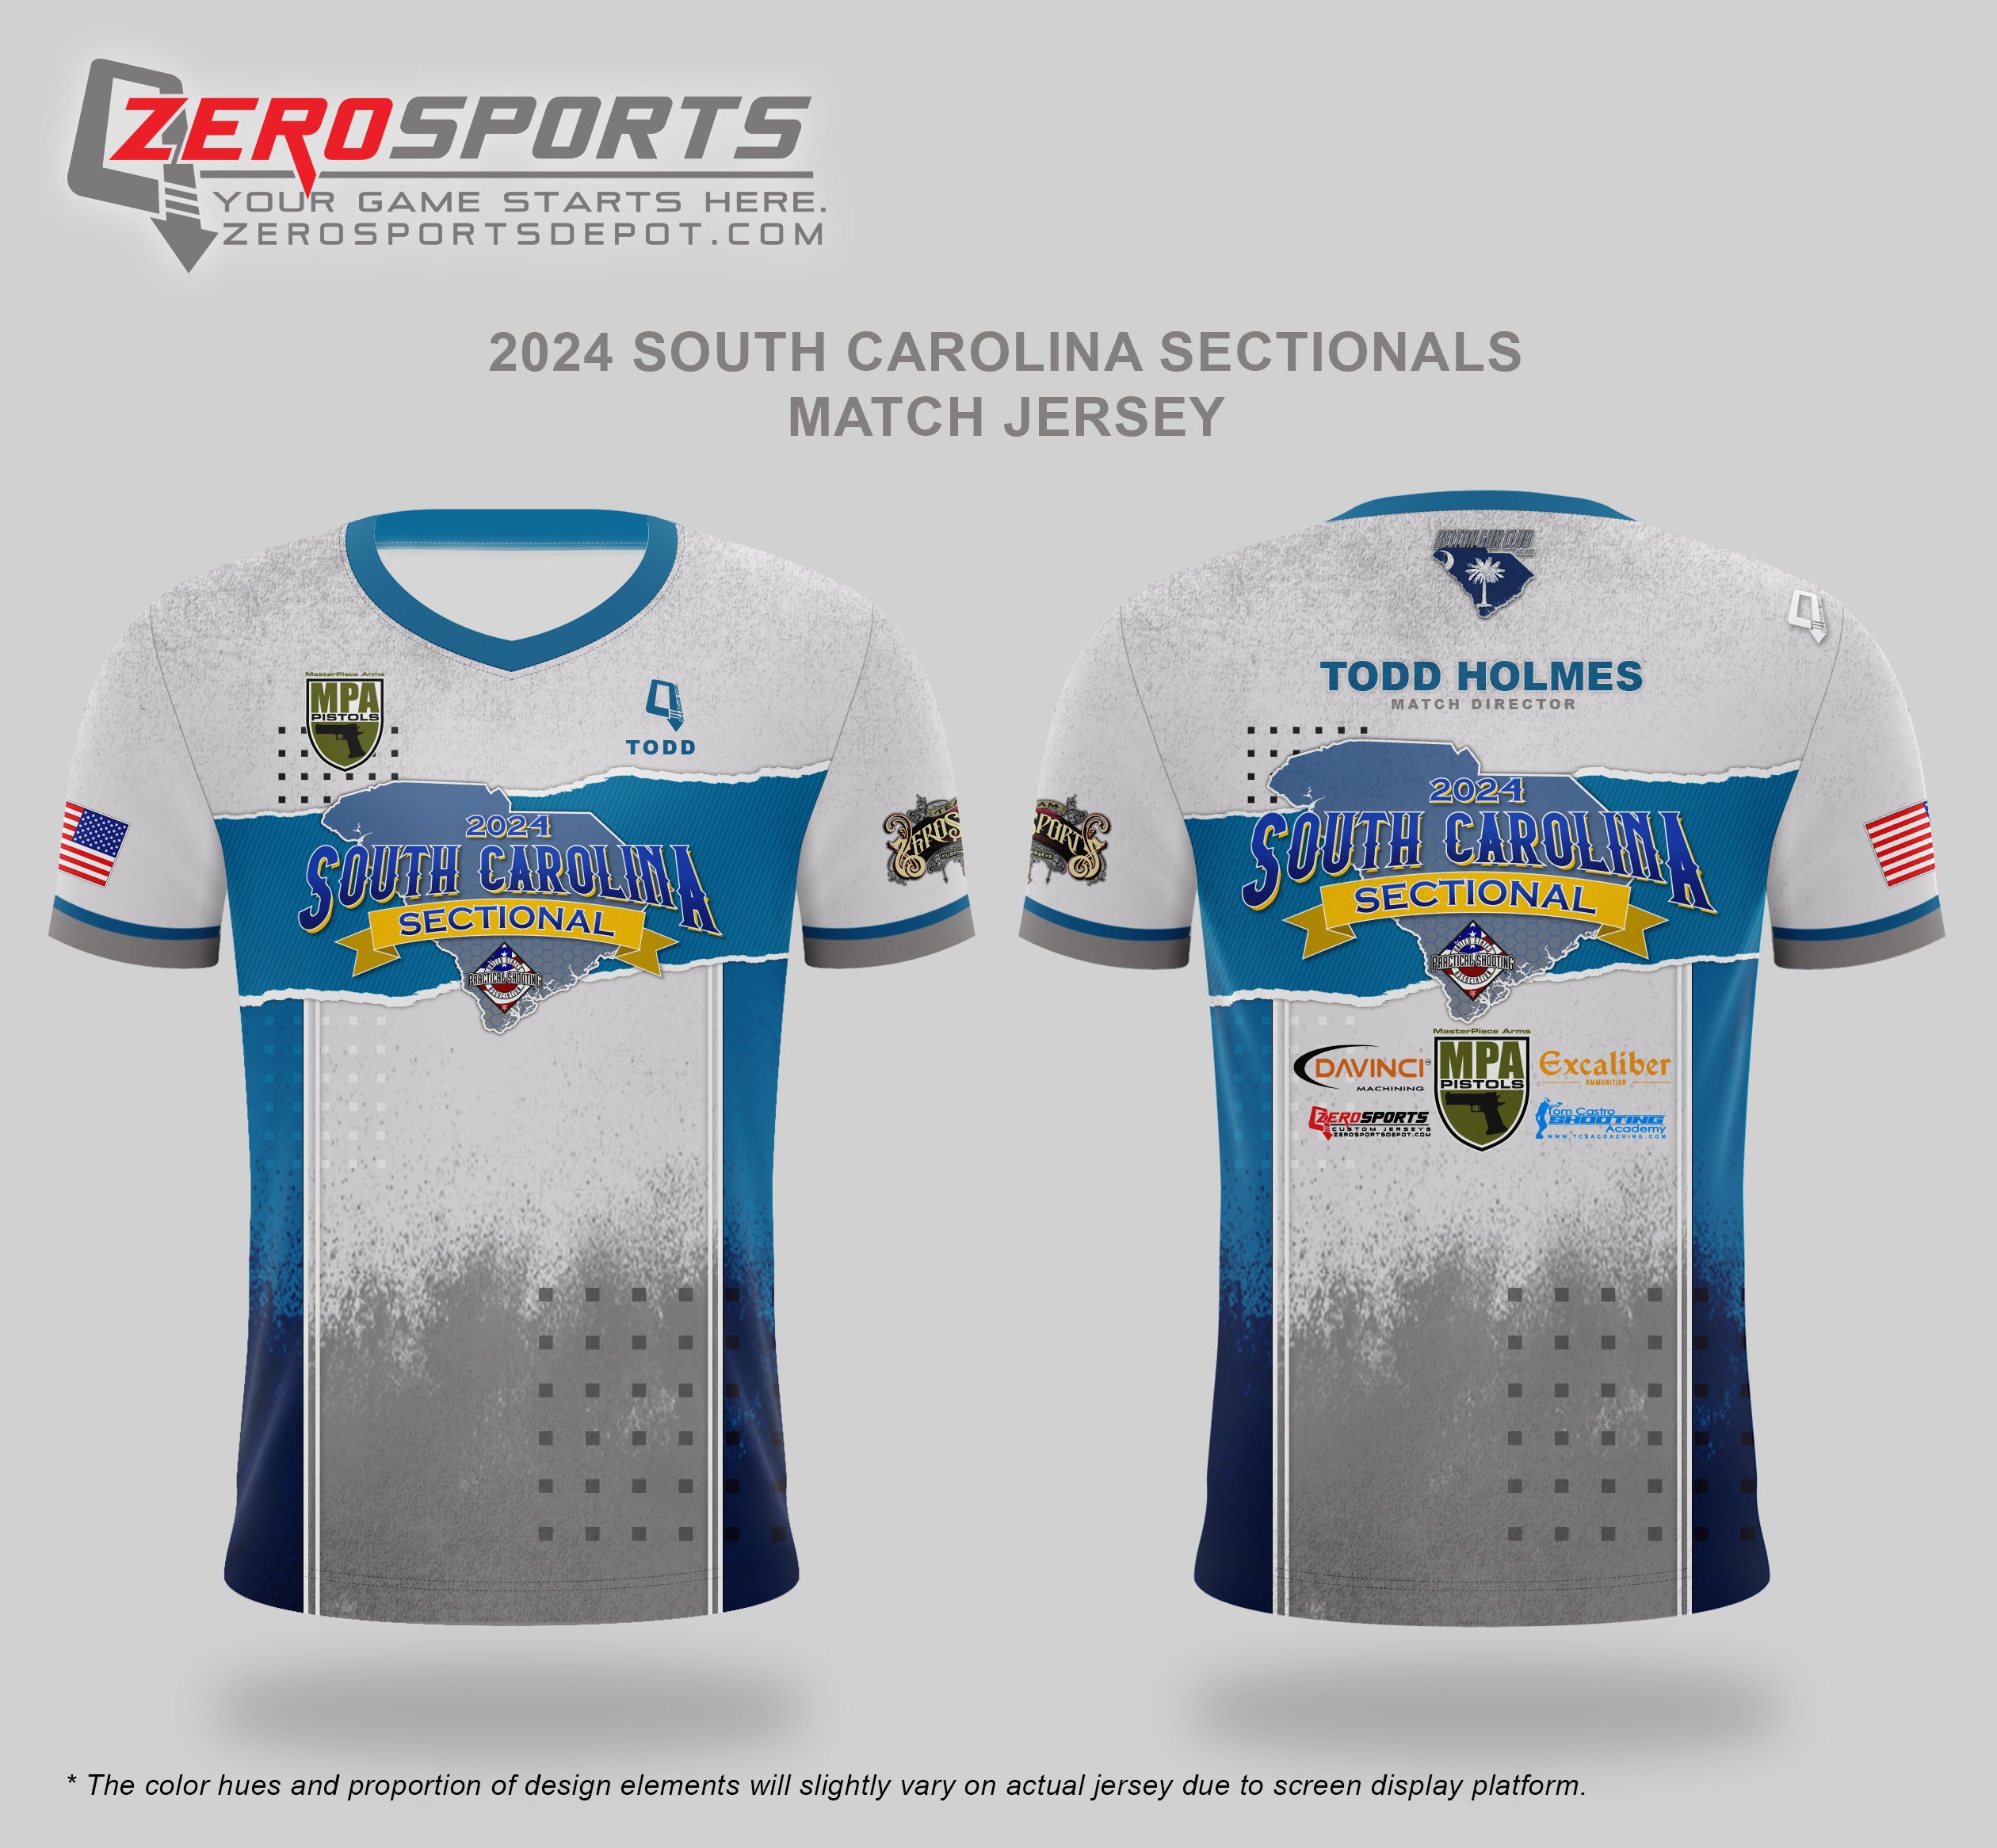 2024 South Carolina Section Championship Match Jersey **All orders after 2/10/2024 will be shipped directly to your address after the match.